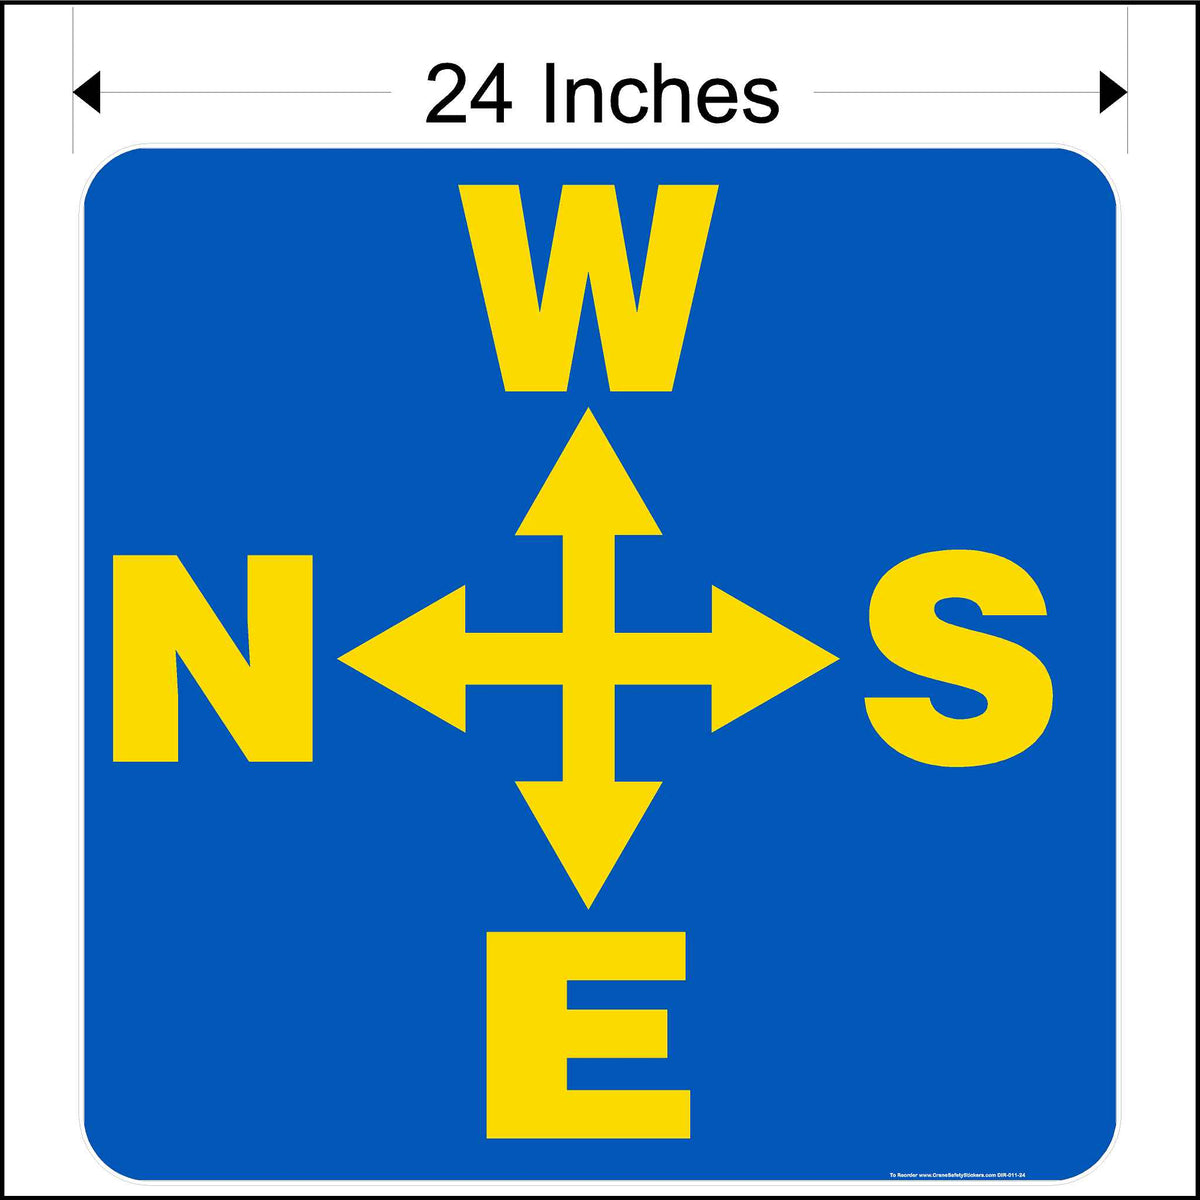 24 Inch overhead crane directional decal. This decal is placed on the side of the crane and has west, south, east, and north arrows printed in yellow on a blue background.